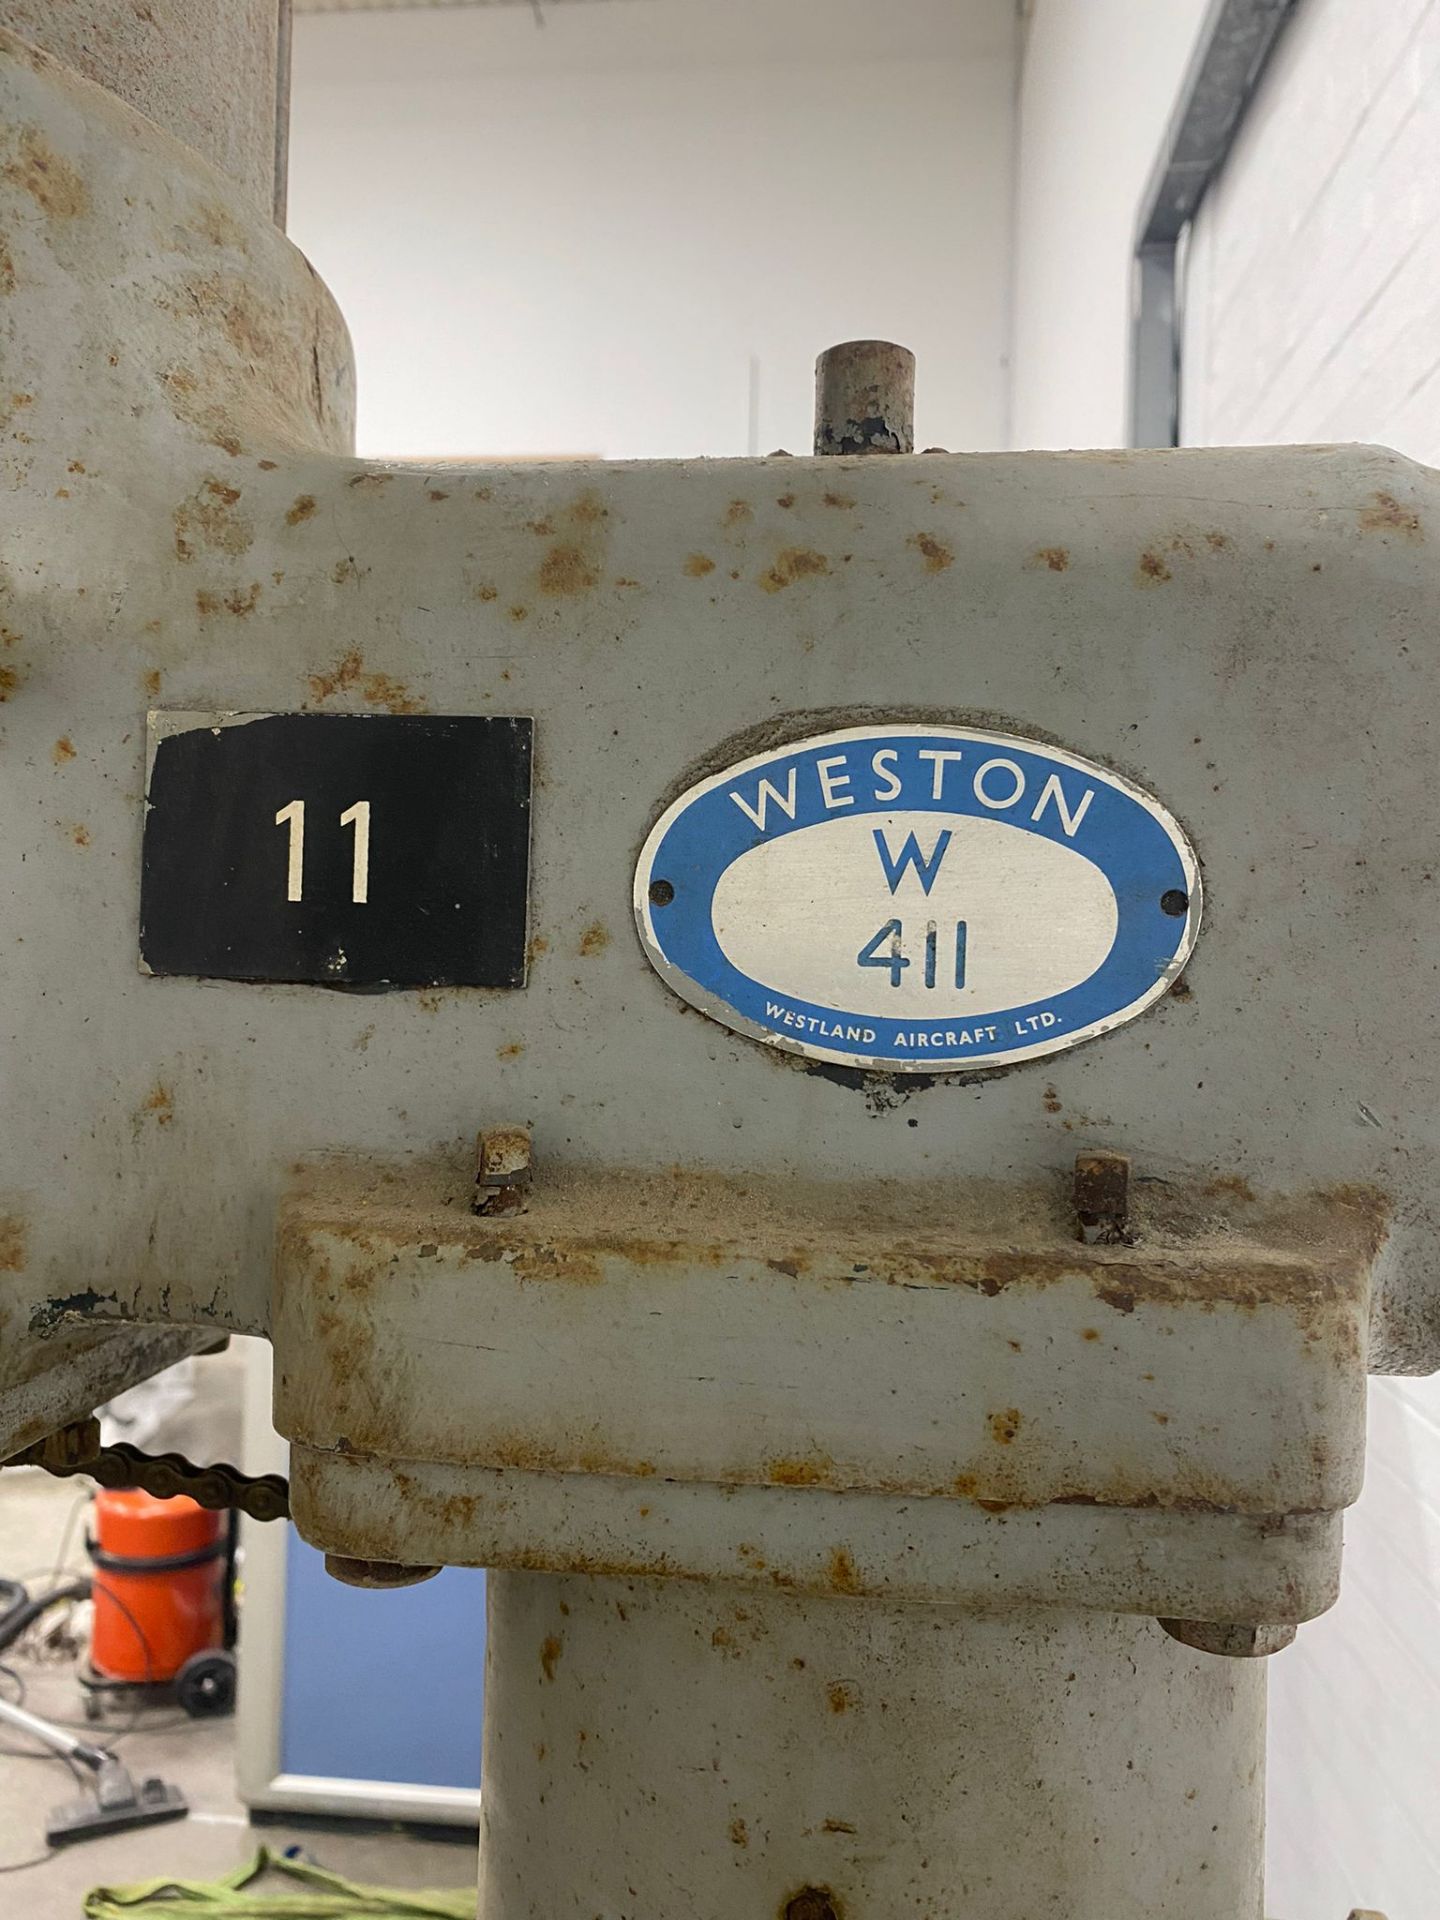 Herbert Weston W 411 Pillar Drill, three phase, loading free of charge - yes, lot located at Ludom - Image 5 of 5